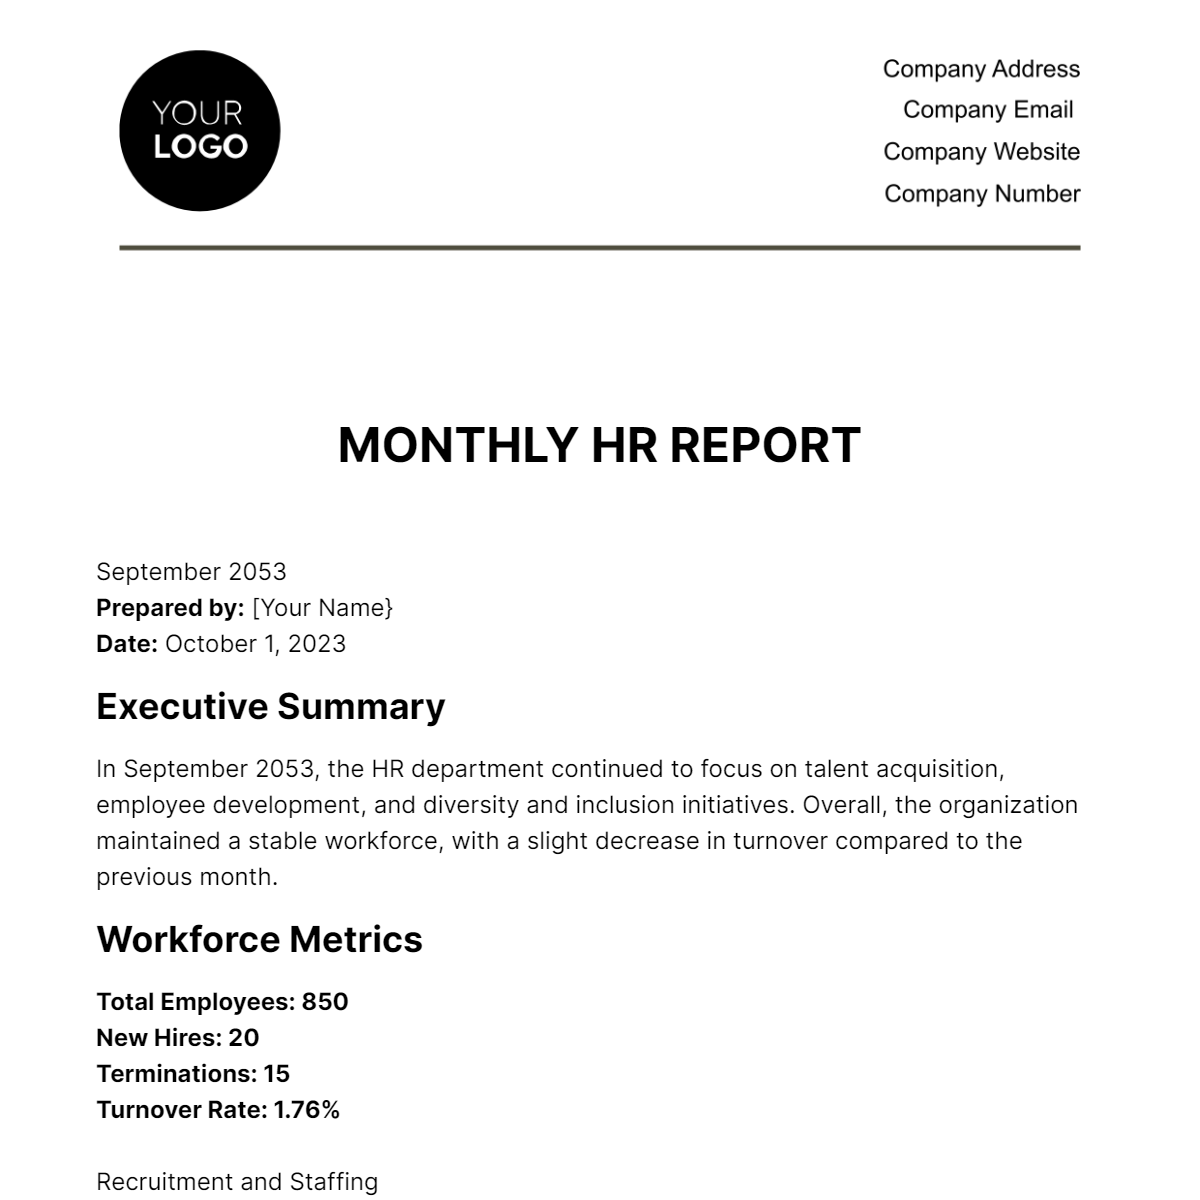 Monthly HR Report Template